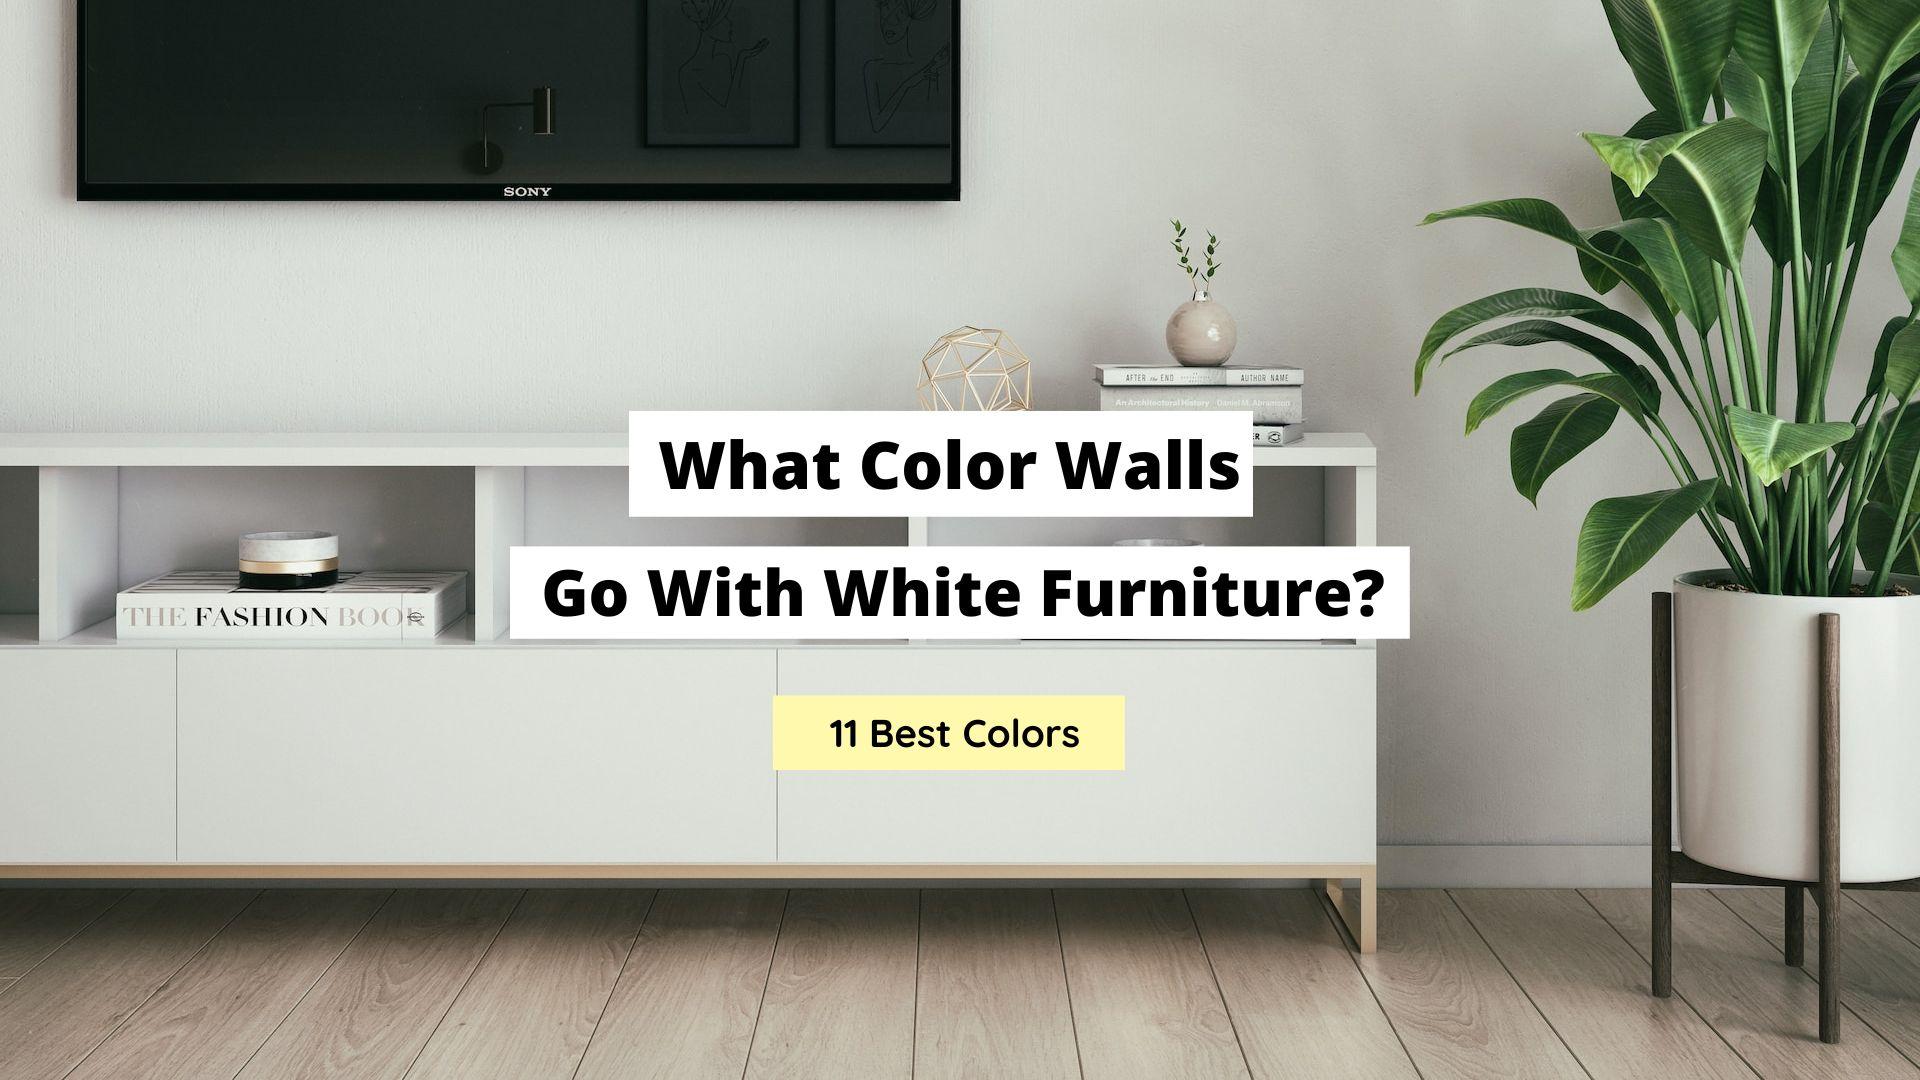 What Color Walls Go With White Furniture